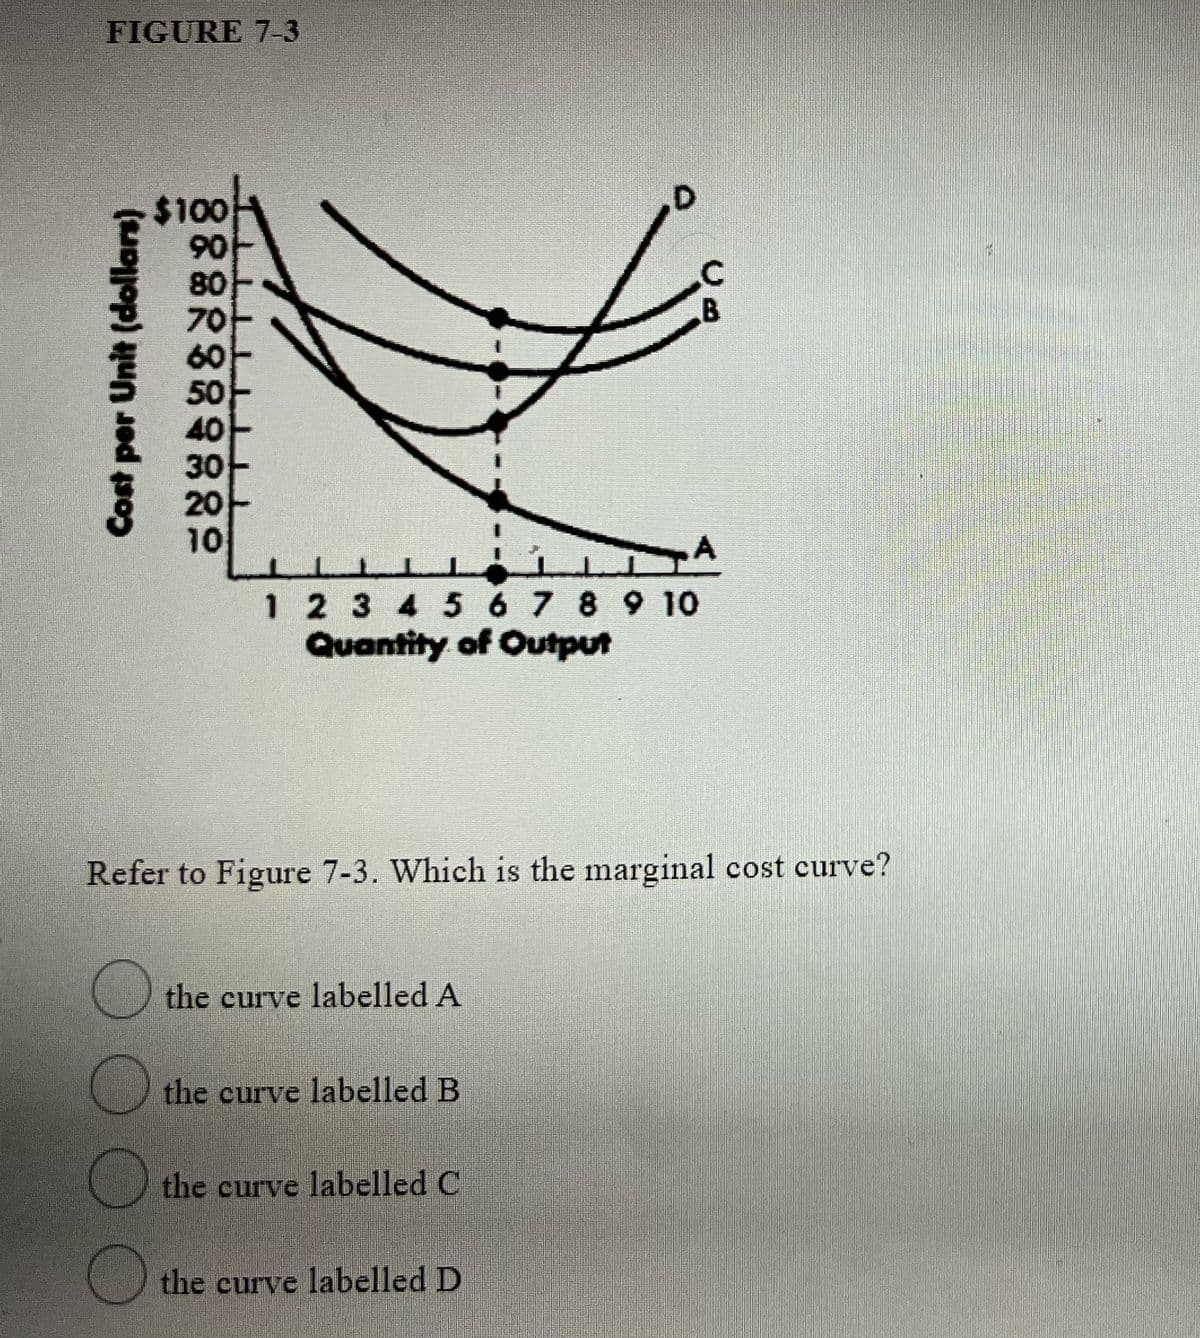 FIGURE 7-3
$100
06
80
70-
60
40
30
20
10
1 2 3 4 5 6 7 8 9 10
Quantity of Output
Refer to Figure 7-3. Which is the marginal cost curve?
U the curve labelled A
the curve labelled B
the curve labelled C
the curve labelled D
Cost per Unit (dollars)
